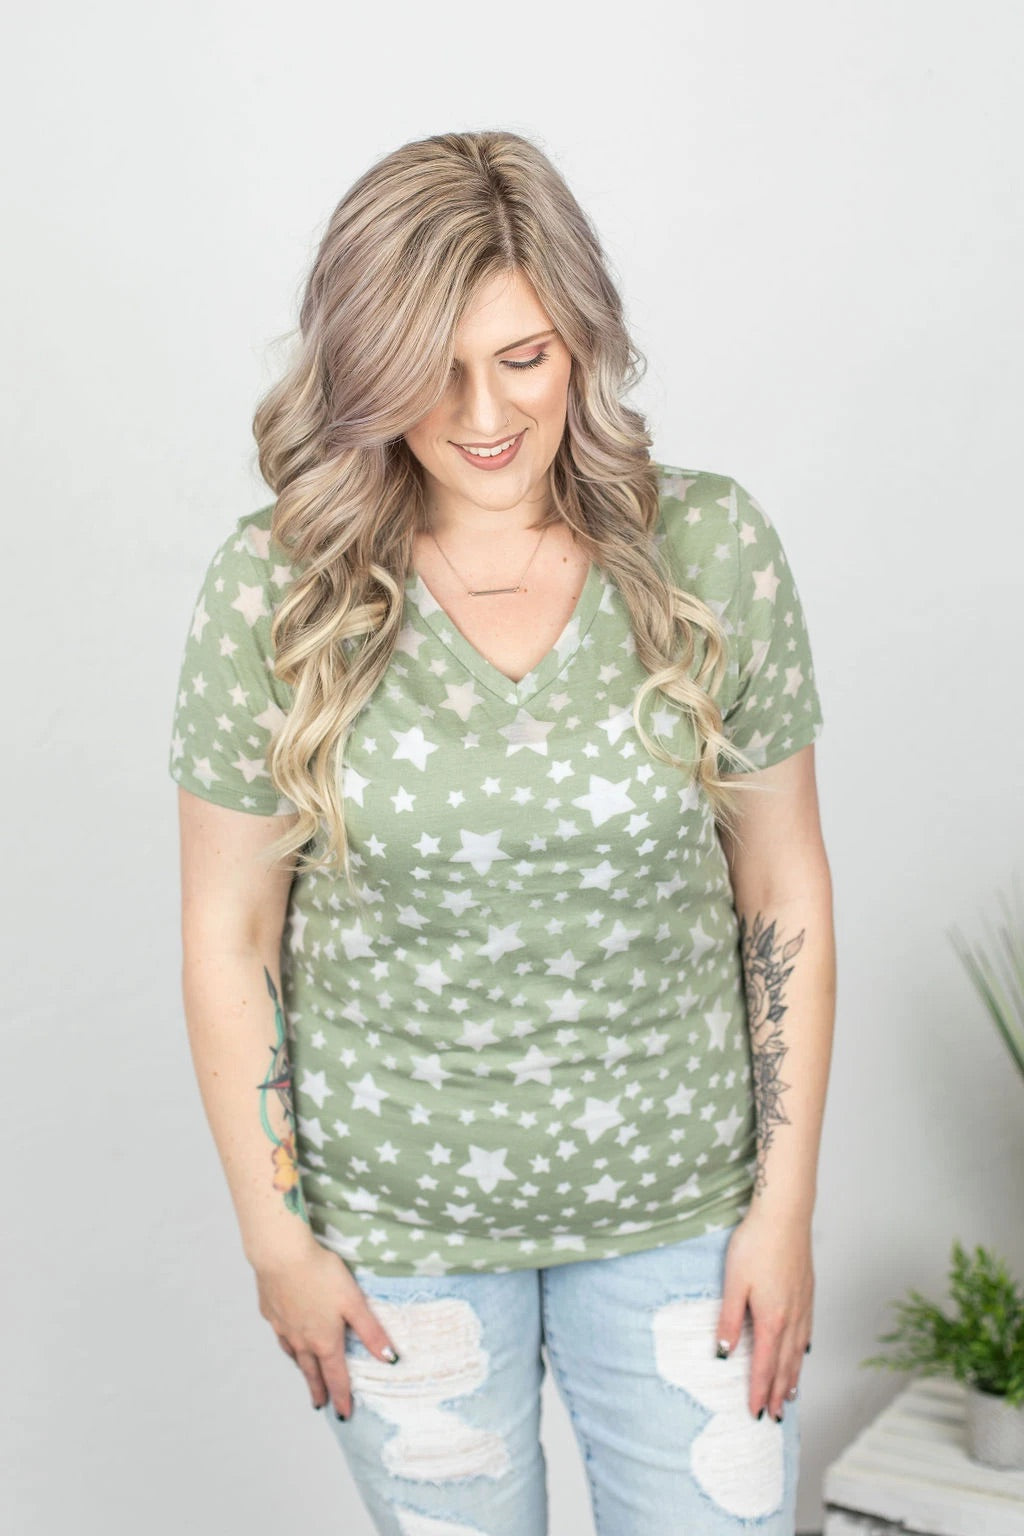 $10 Burnout Star Tee - Olive - 4X Only